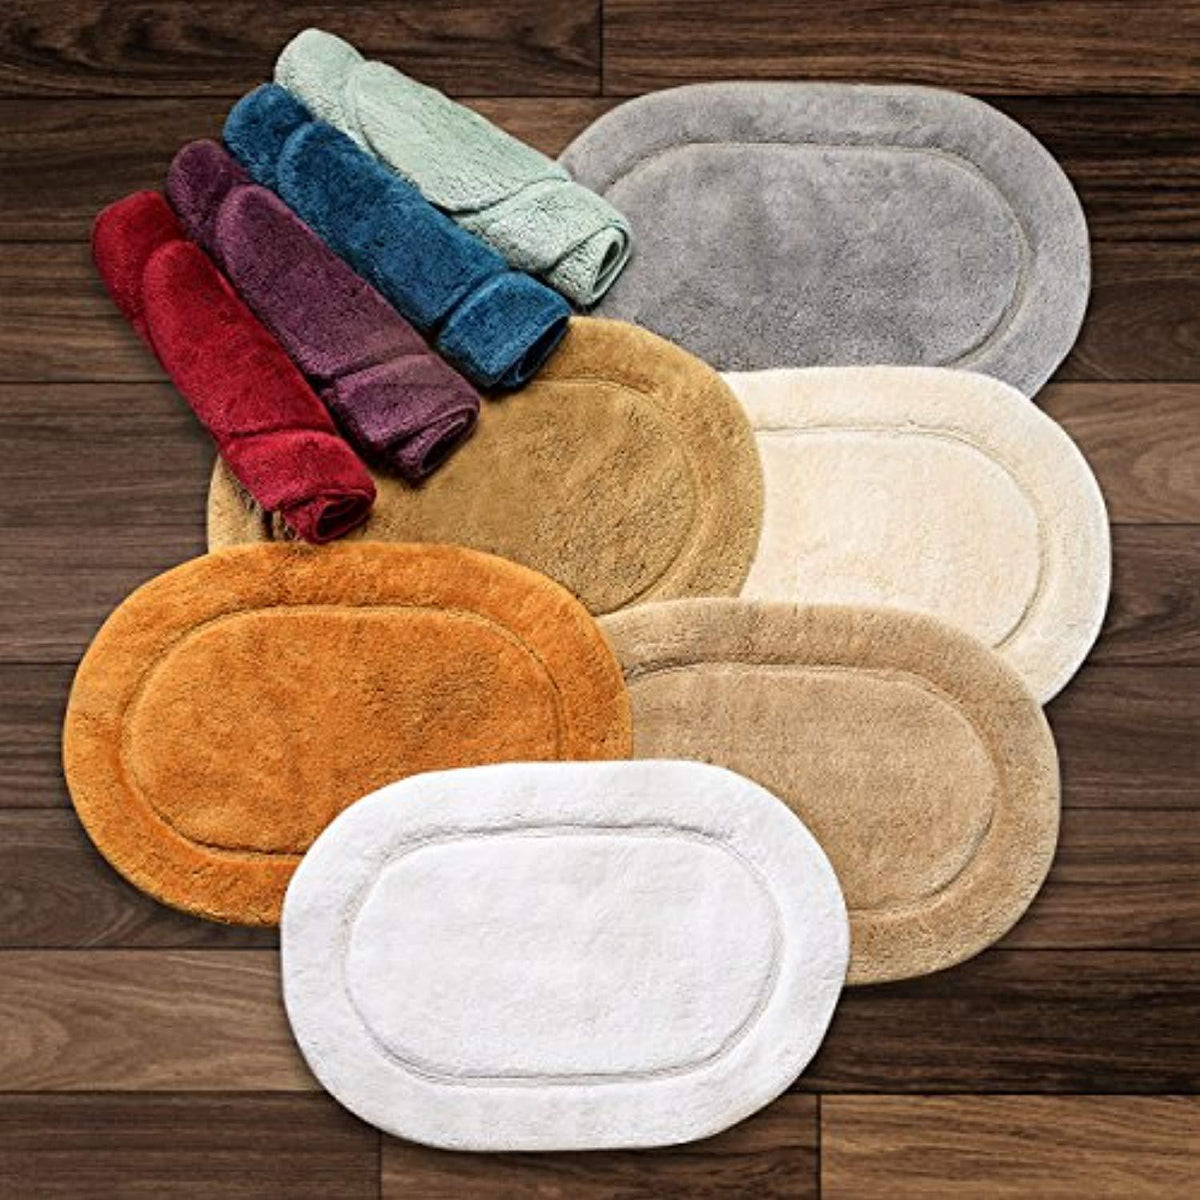 http://downcotton.com/cdn/shop/products/ultra-plush-soft-and-absorbent-100-combed-cotton-pile-bath-rugs-oval-checkered-styles-bath-rug-down-cotton-371618_1200x1200.jpg?v=1601575711